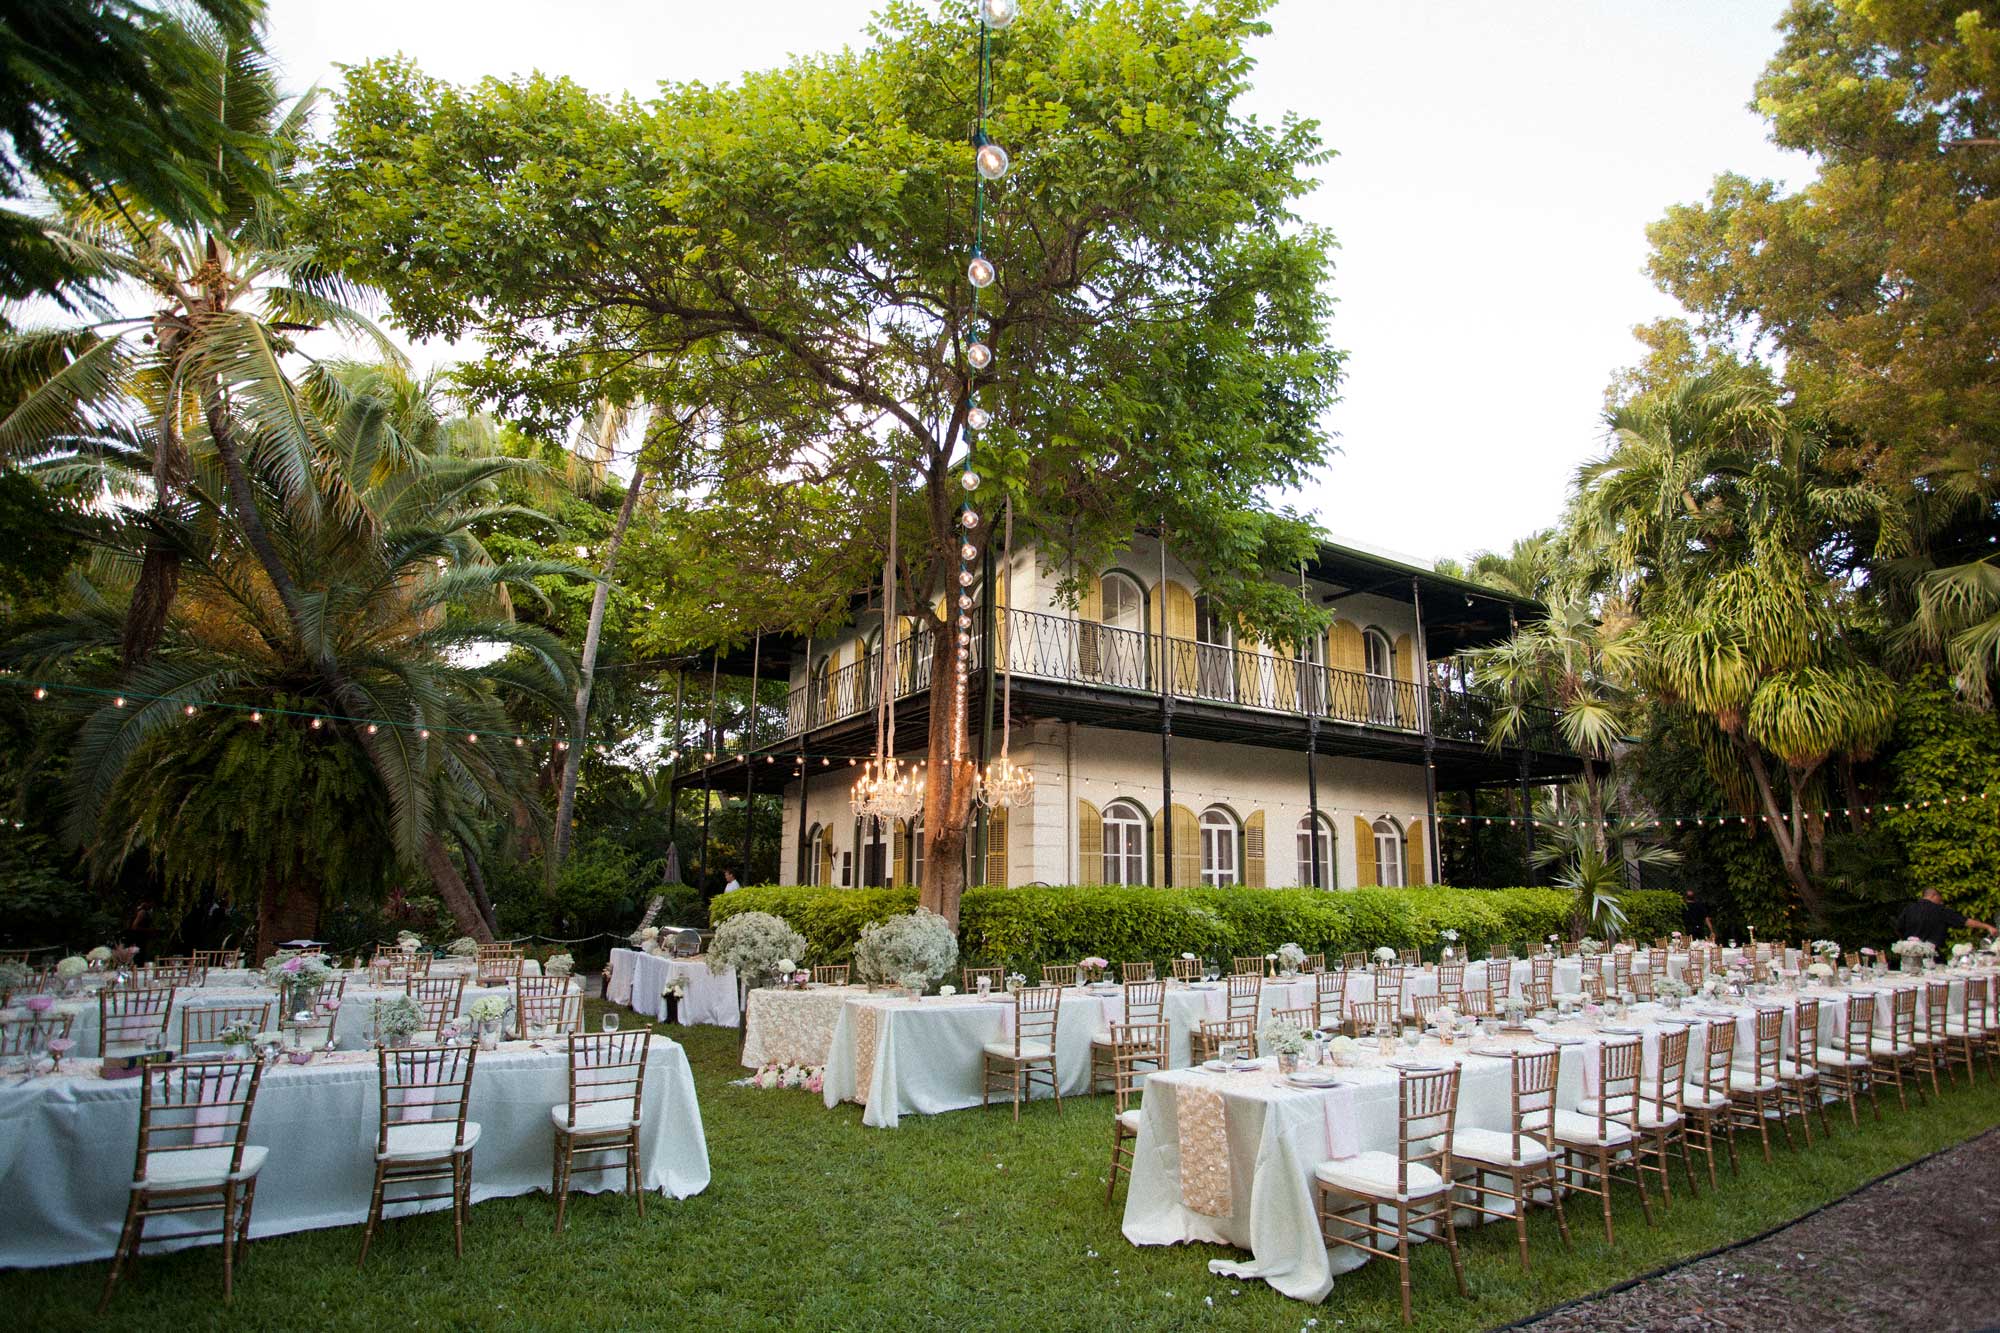 Top Florida Wedding Venues for Florida Destination Weddings | Best Places to Get Married in Florida | Ernest Hemingway Home and Museum